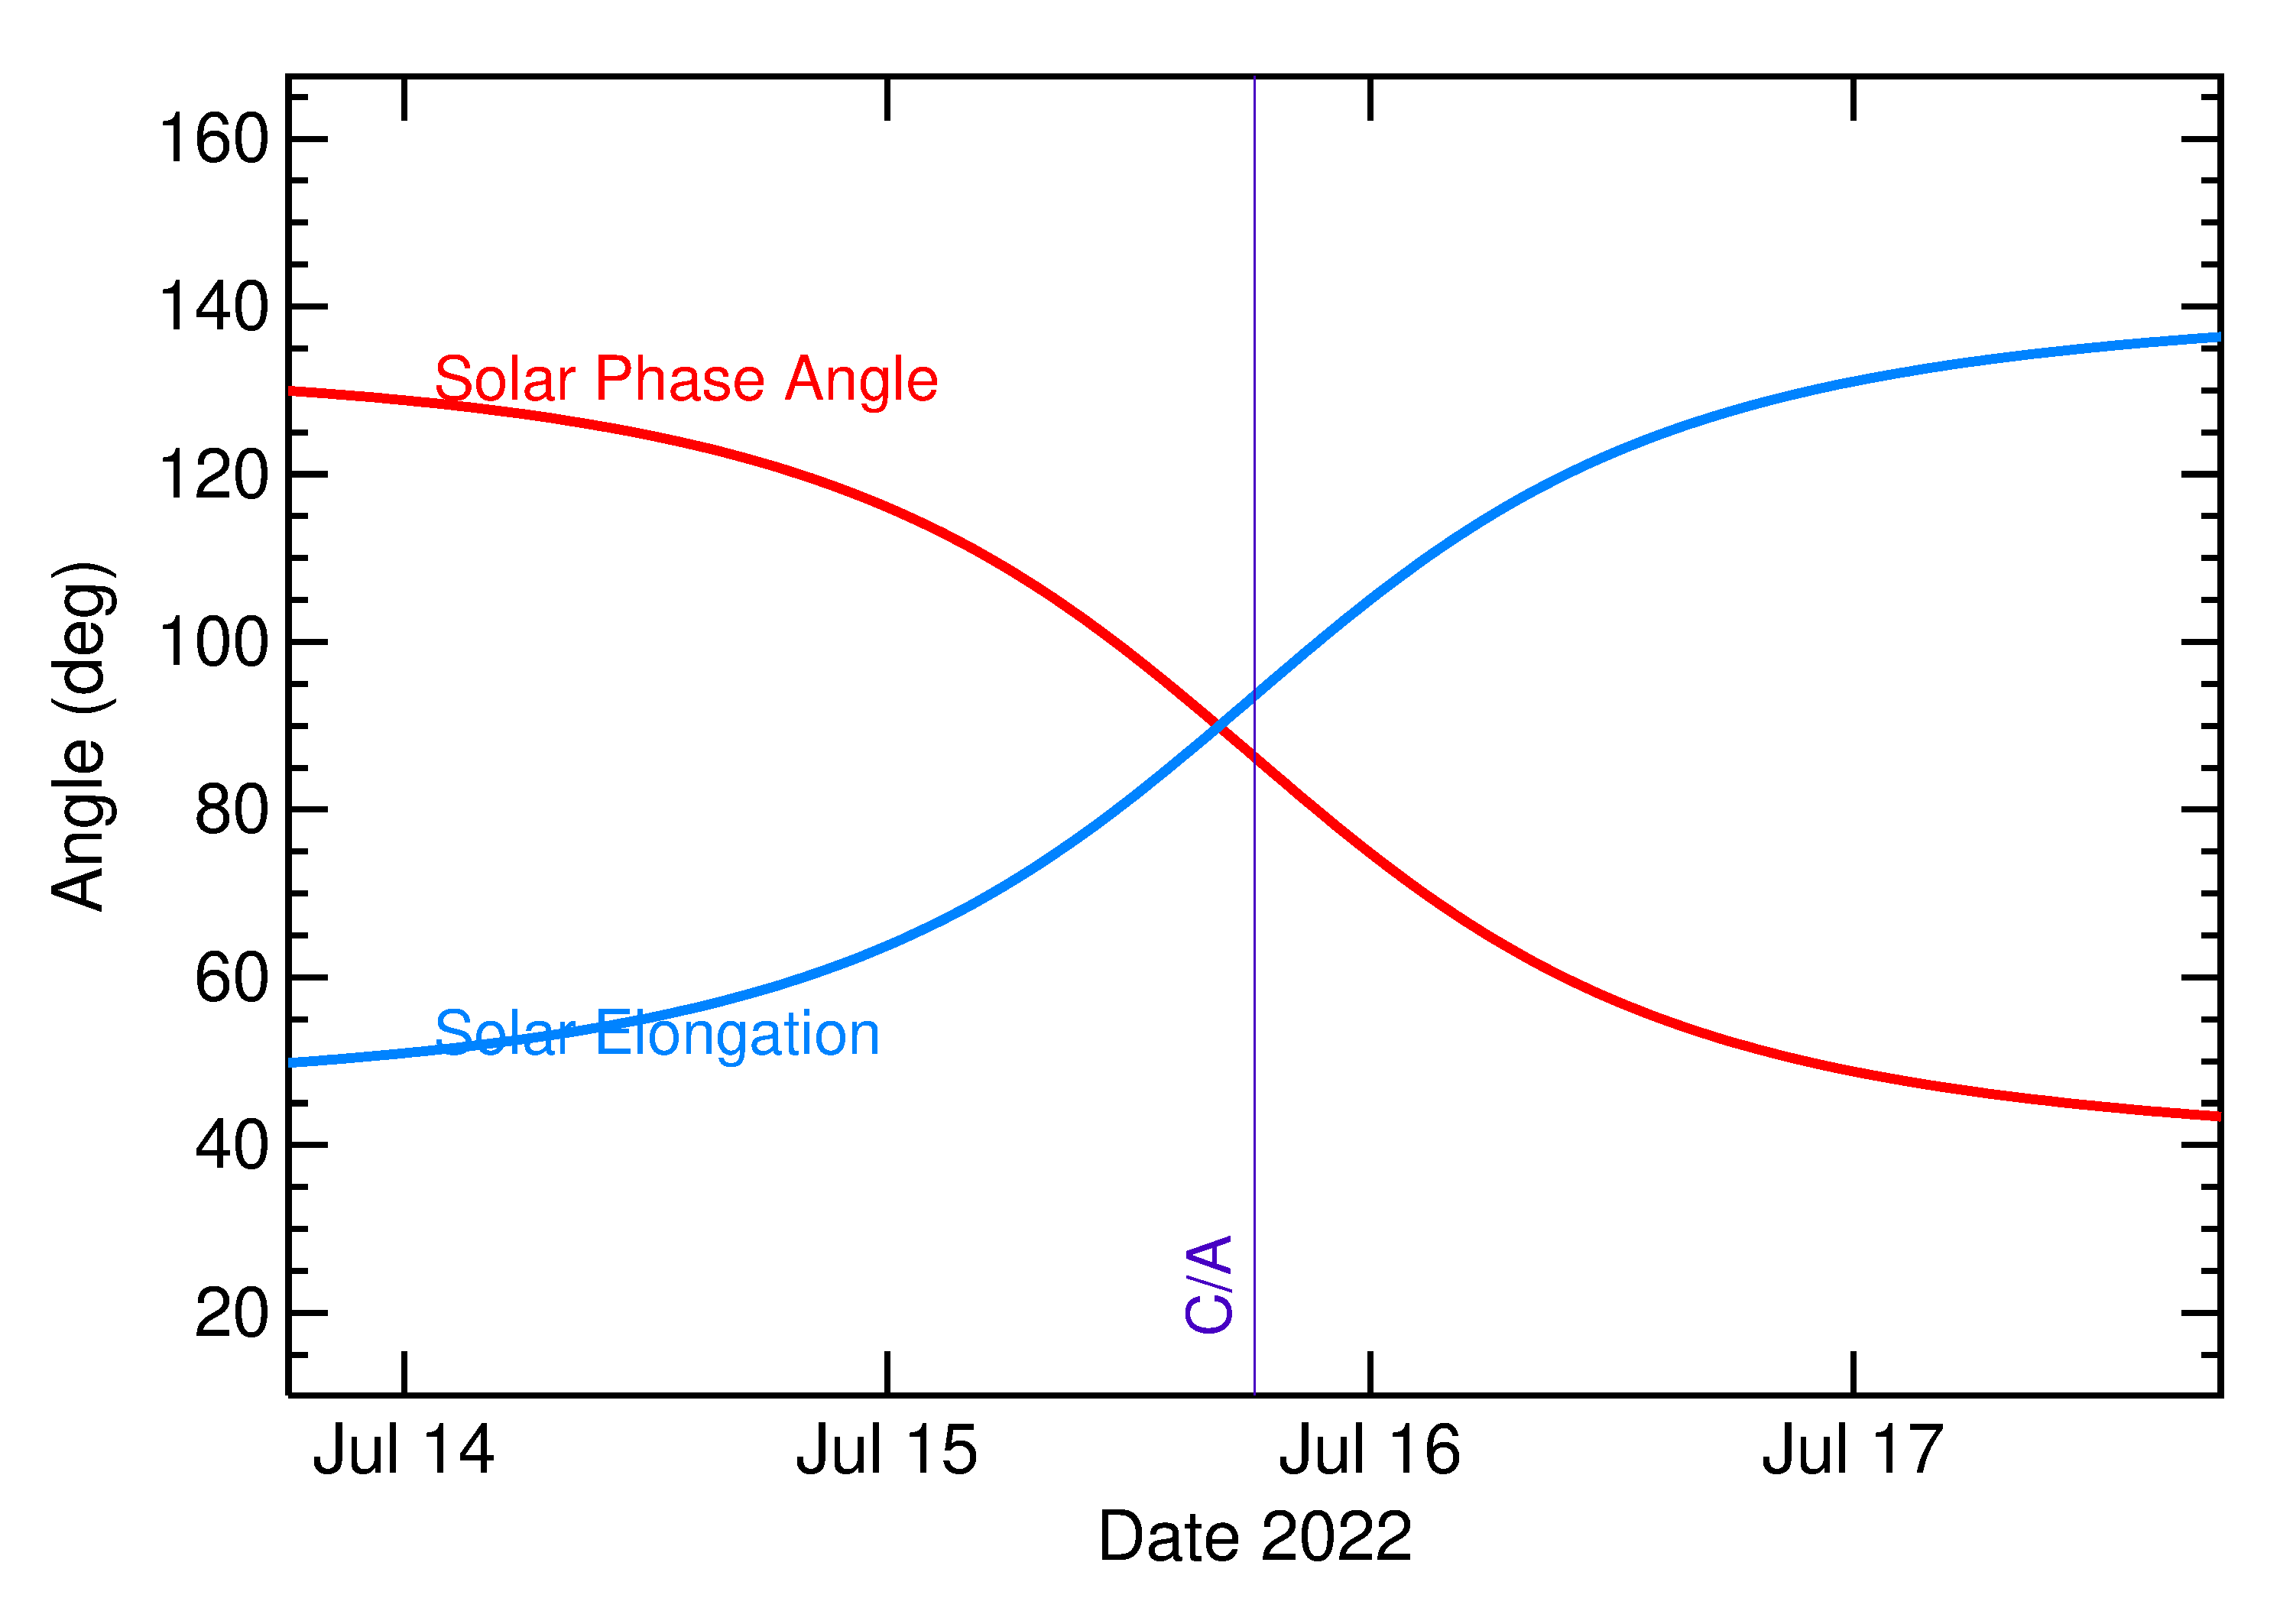 Solar Elongation and Solar Phase Angle of 2022 OR1 in the days around closest approach